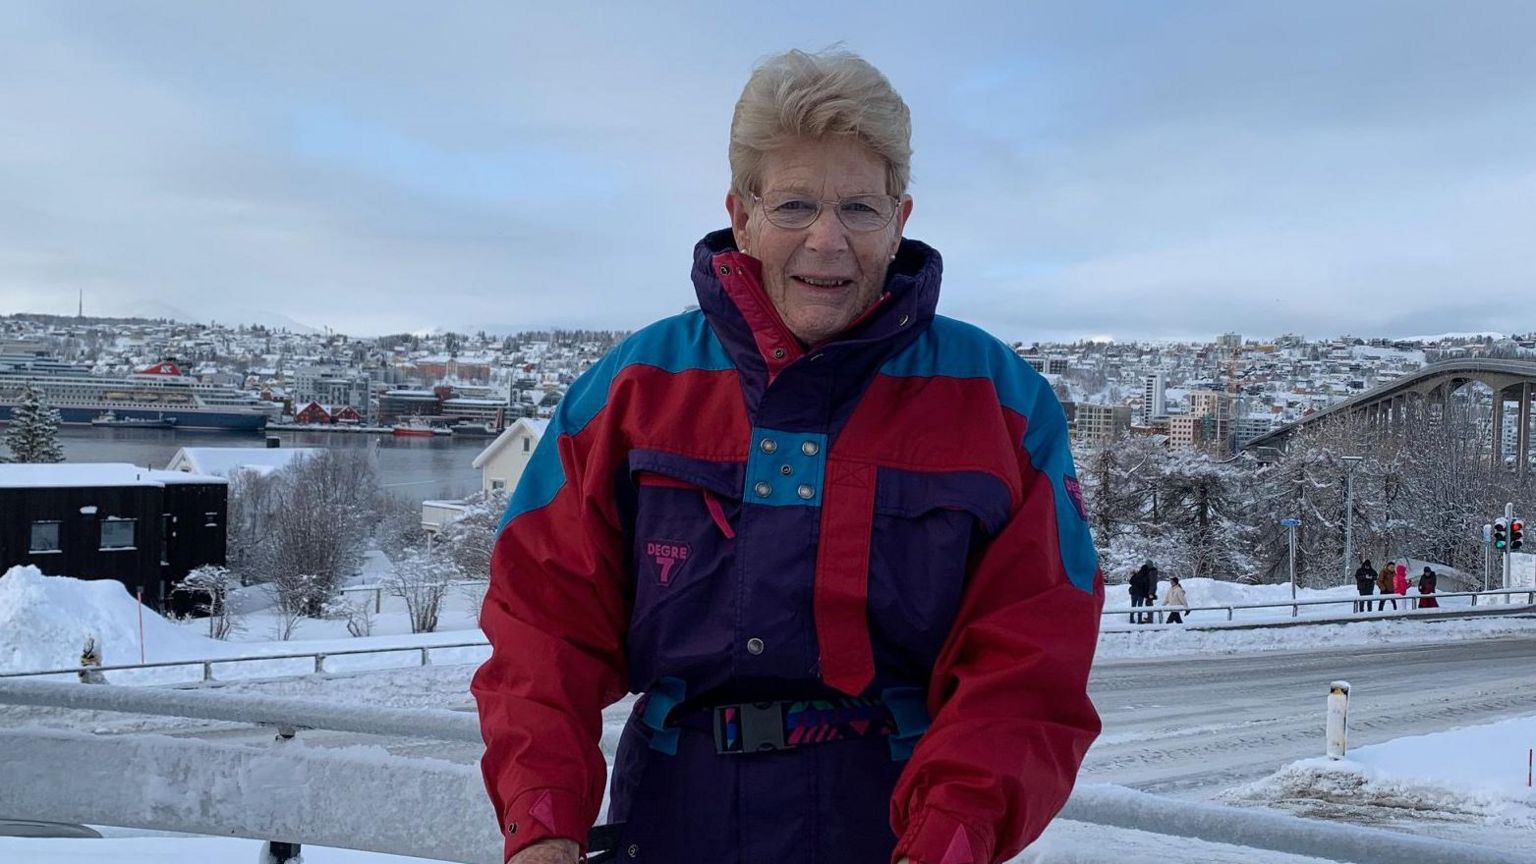 Sue Shapland in a snowsuit in snowy Norway